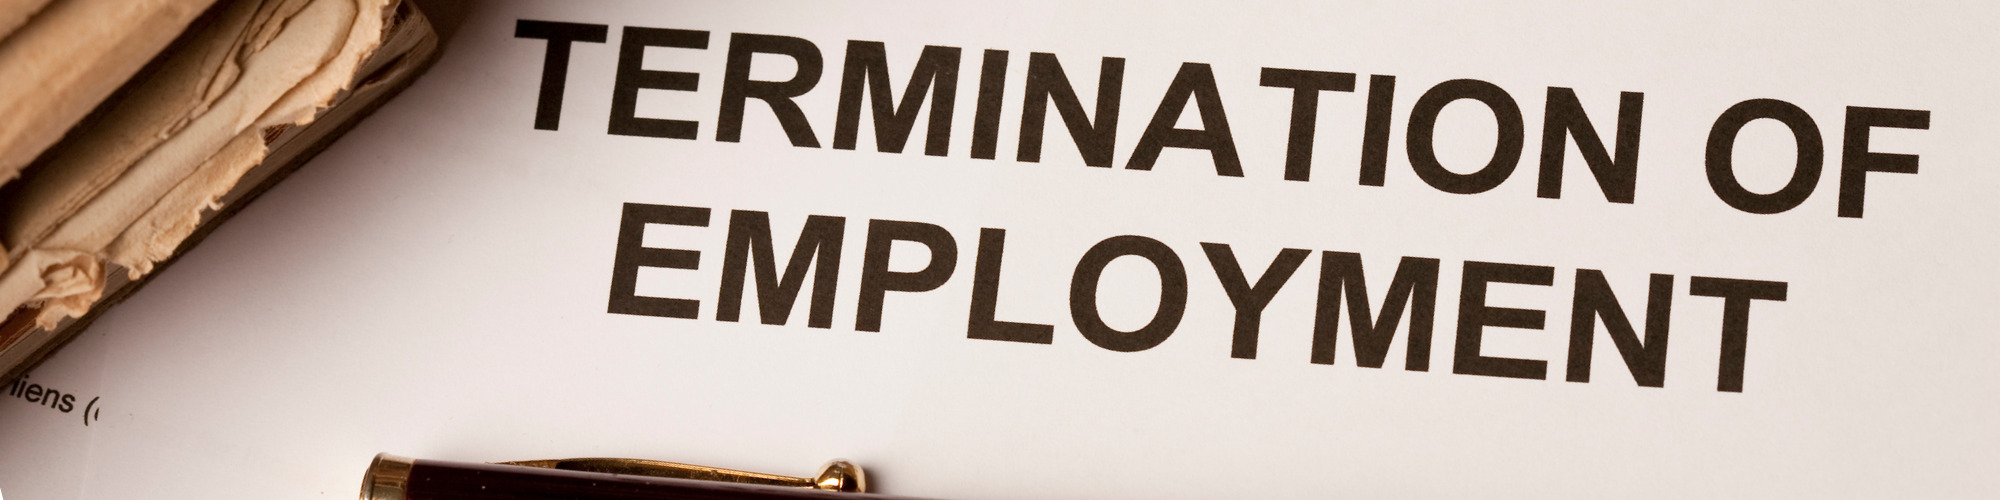 Termination of Employment - Practical Guidance Live at Your Desk